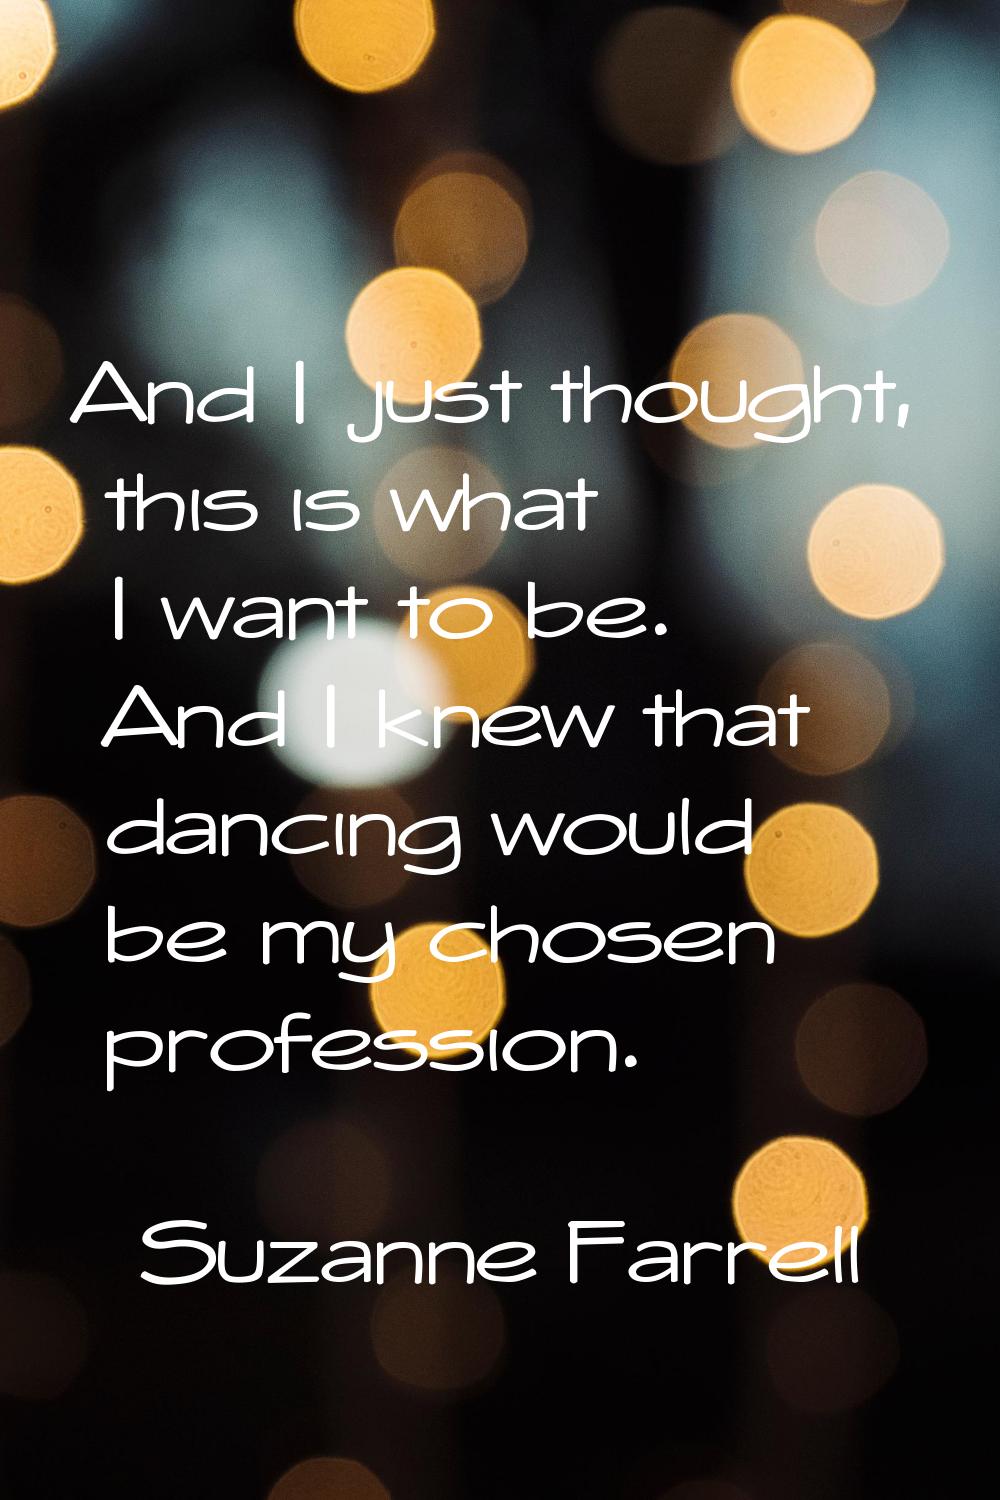 And I just thought, this is what I want to be. And I knew that dancing would be my chosen professio